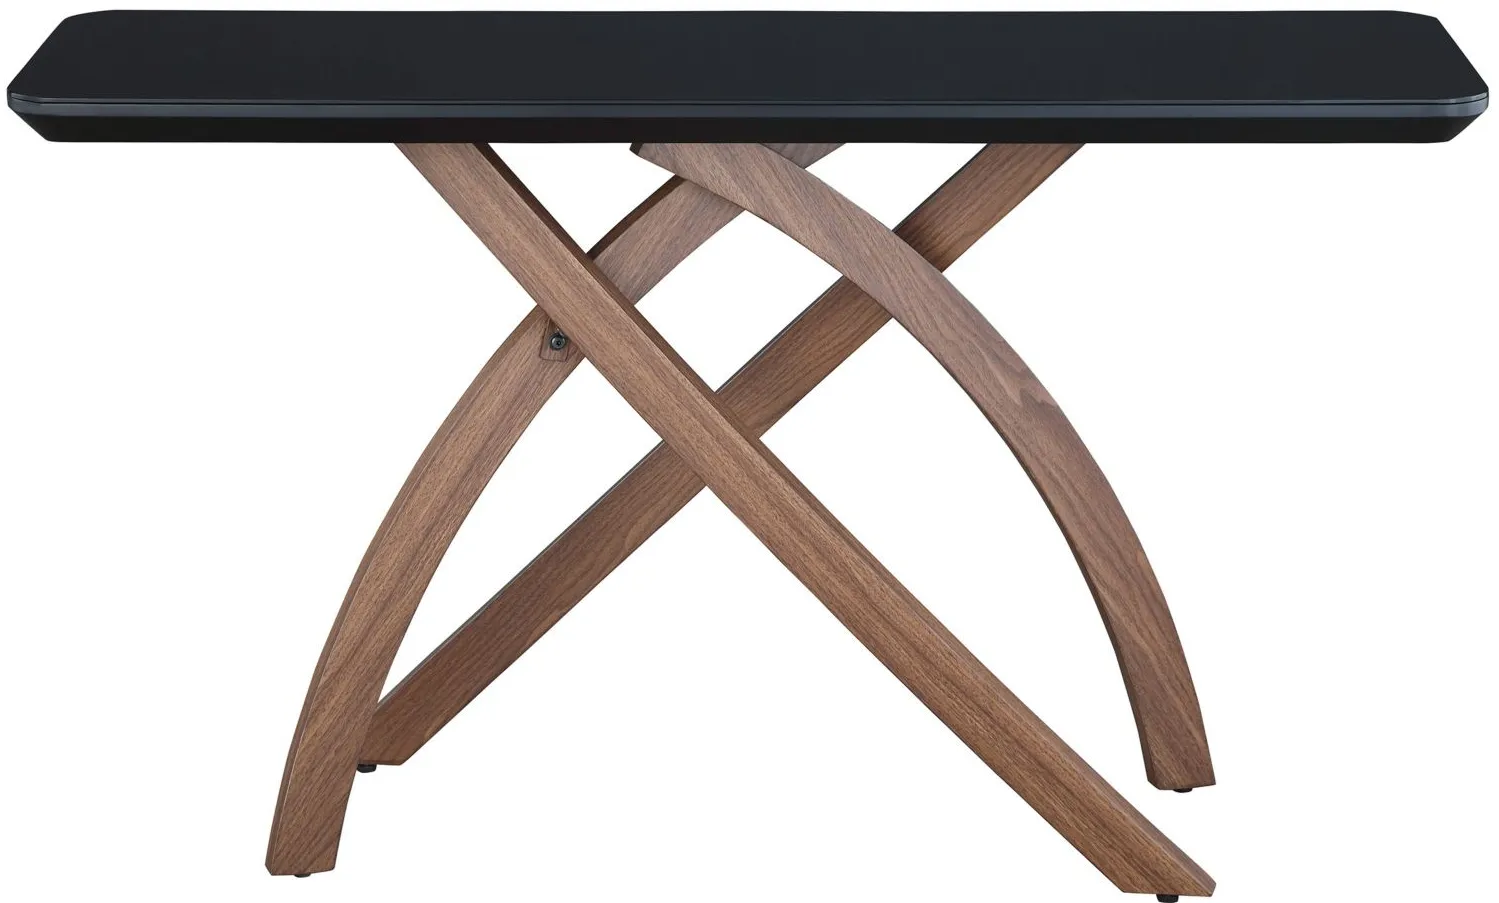 Emily Sofa Table in Black / Walnut by Chintaly Imports